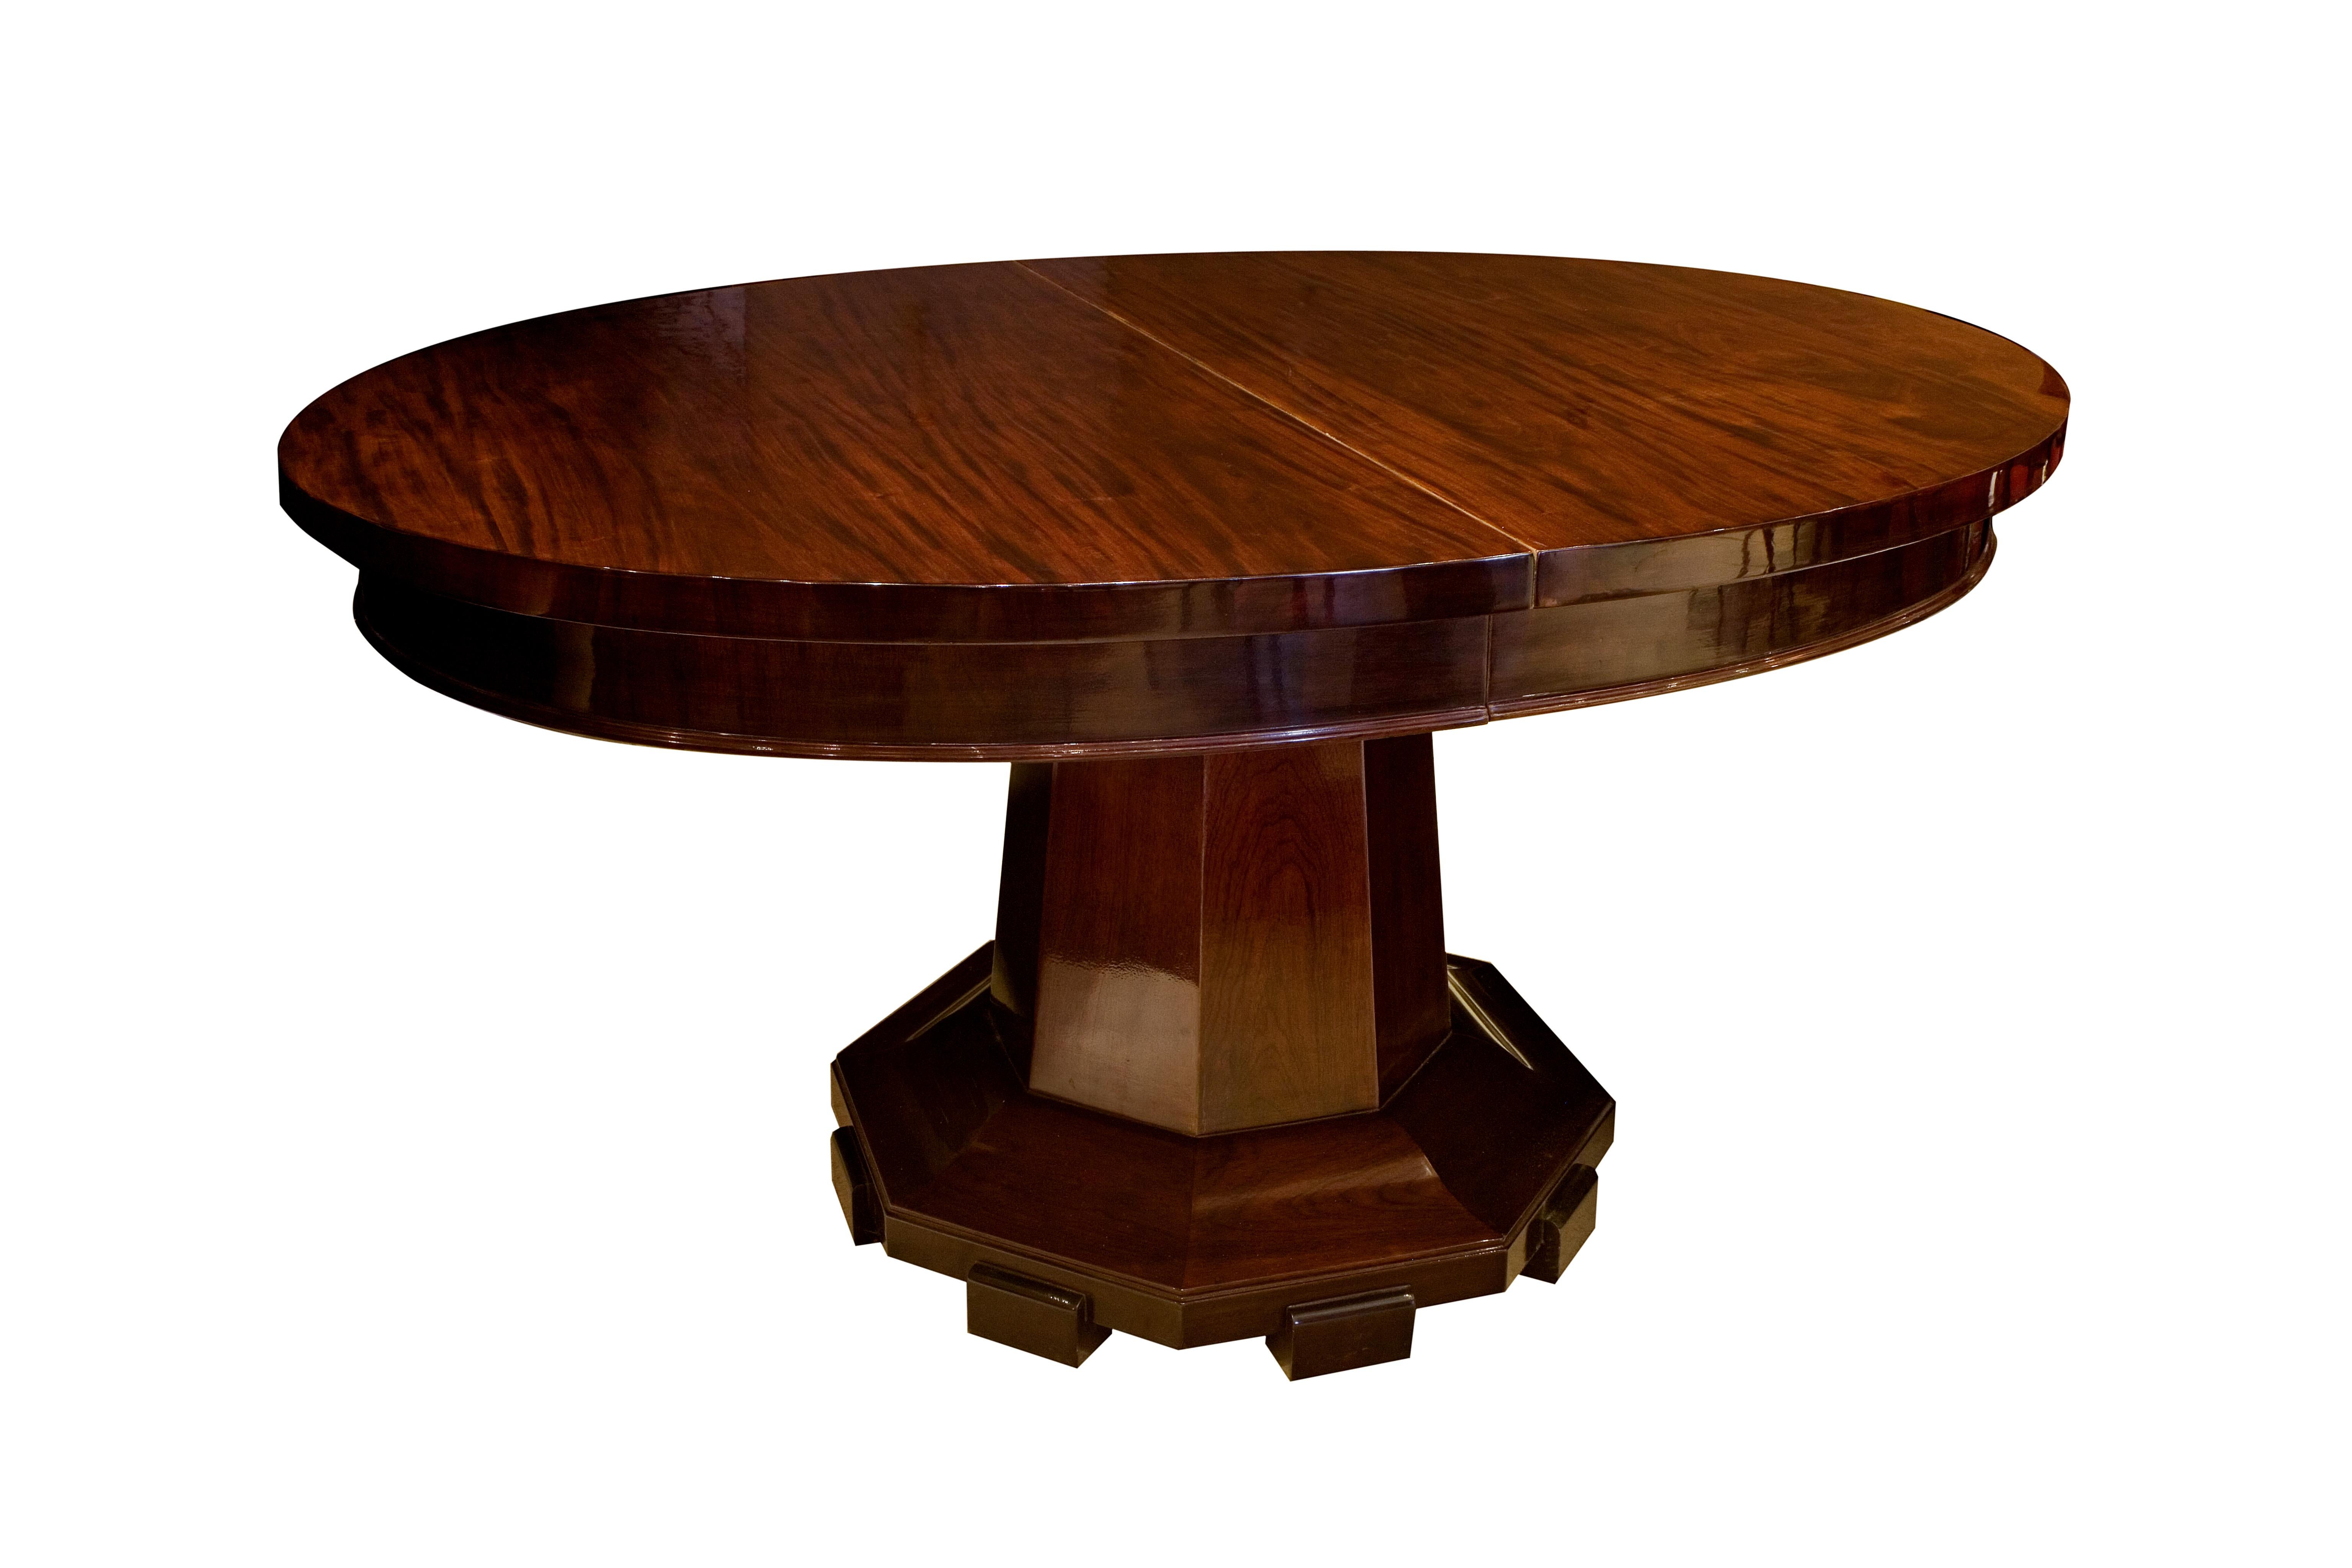 Dining table Art Deco

Year: 1920
Country: French
Wood 
Finish: polyurethanic lacquer
It is an elegant and sophisticated dining table.
You want to live in the golden years, this is the dining table that your project needs.
We have specialized in the